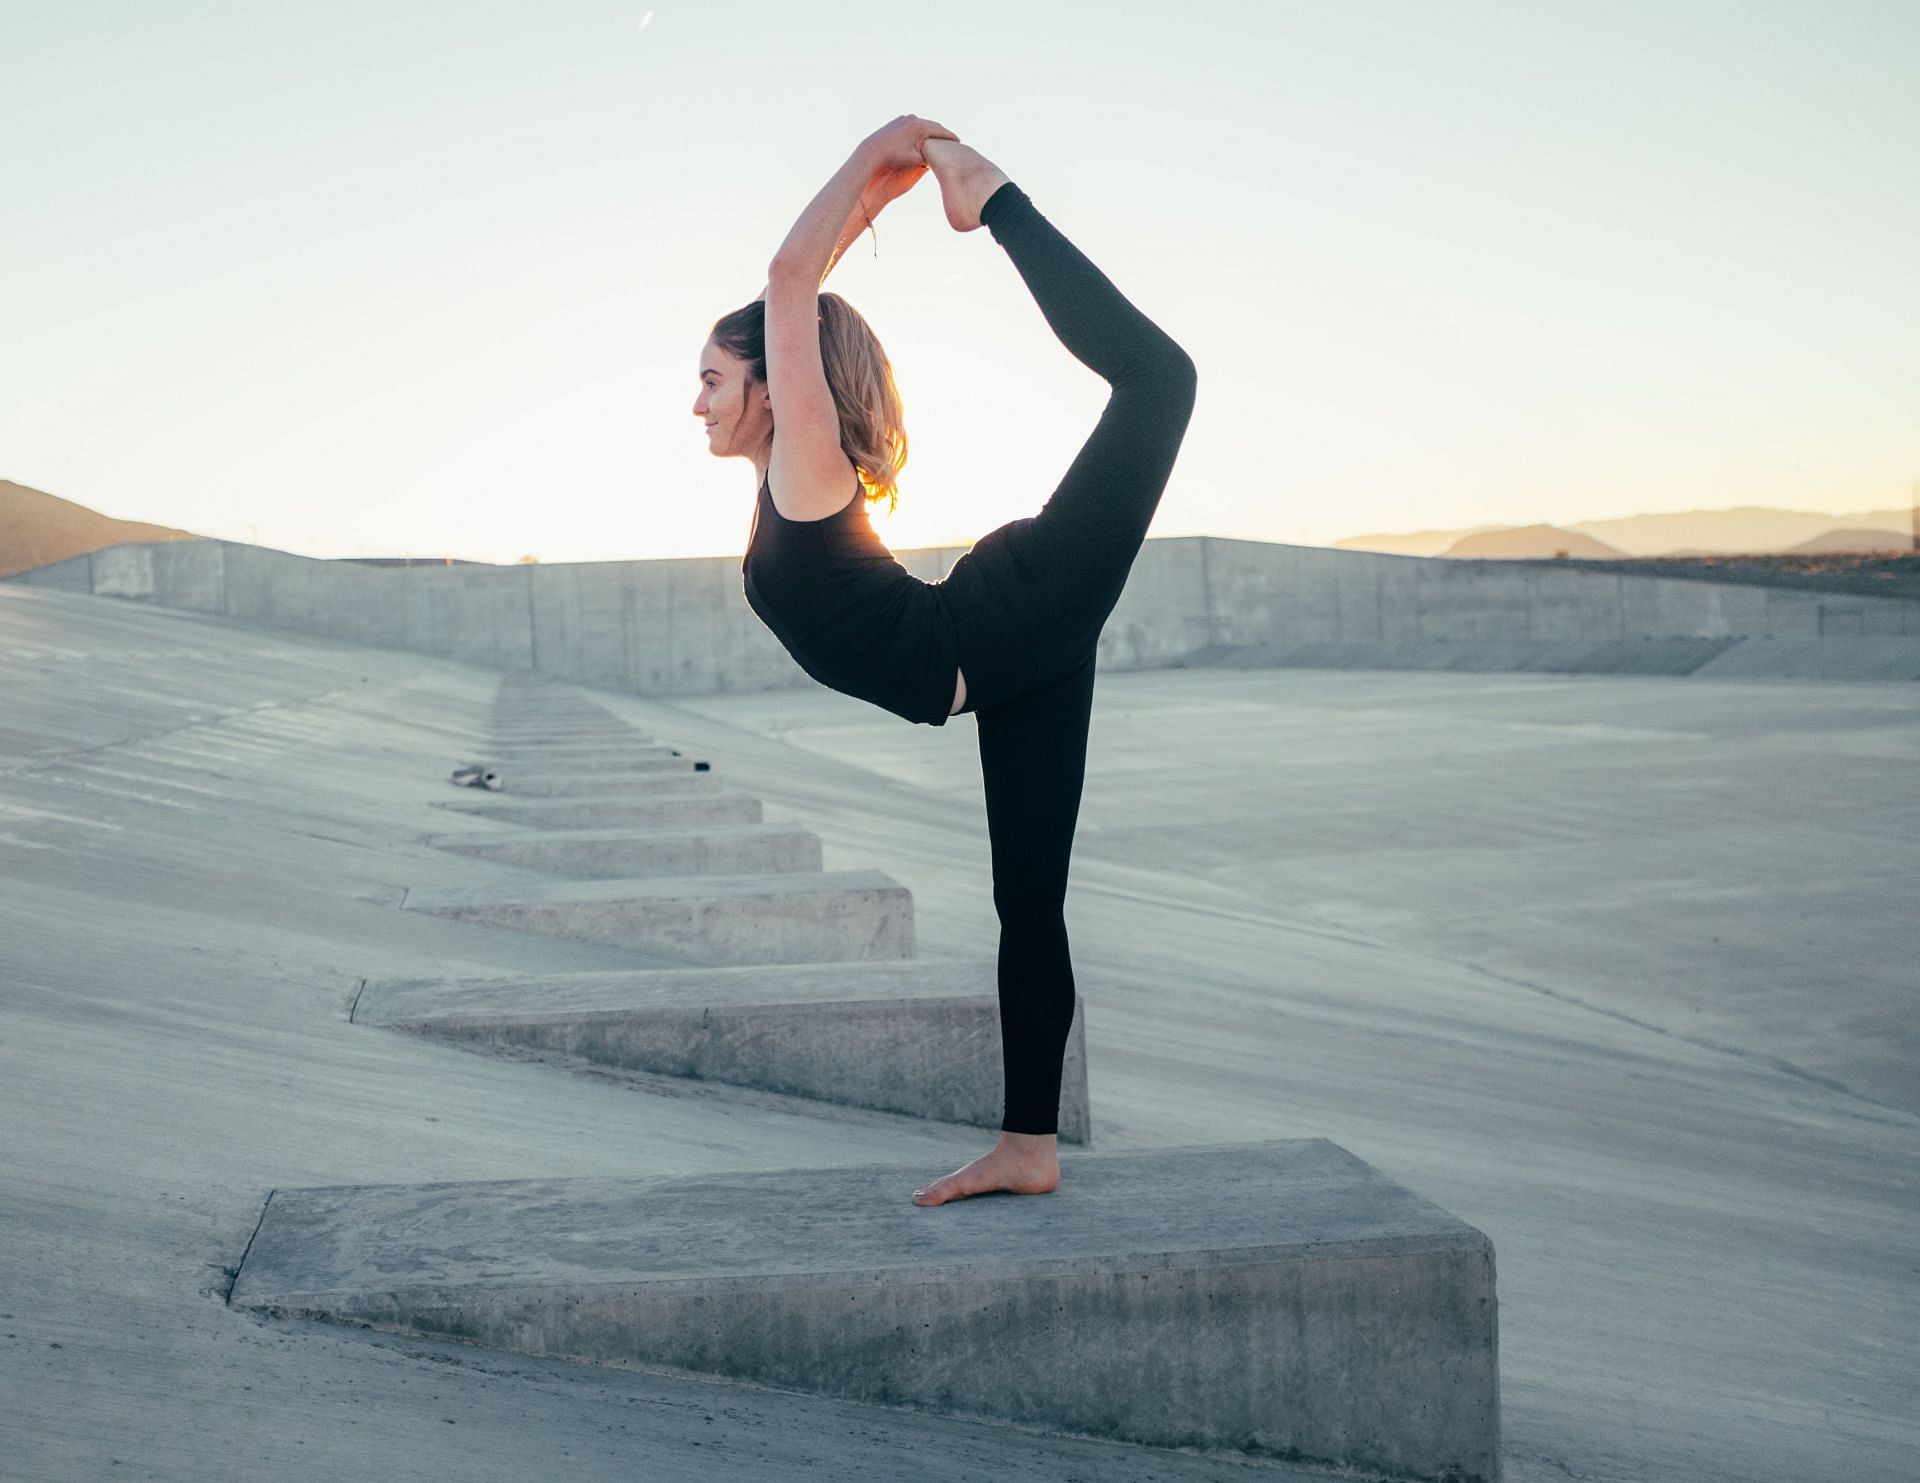 Yoga is a great way to relax and stretch your glute muscles. (Image via Unsplash /Wesley Tingey)